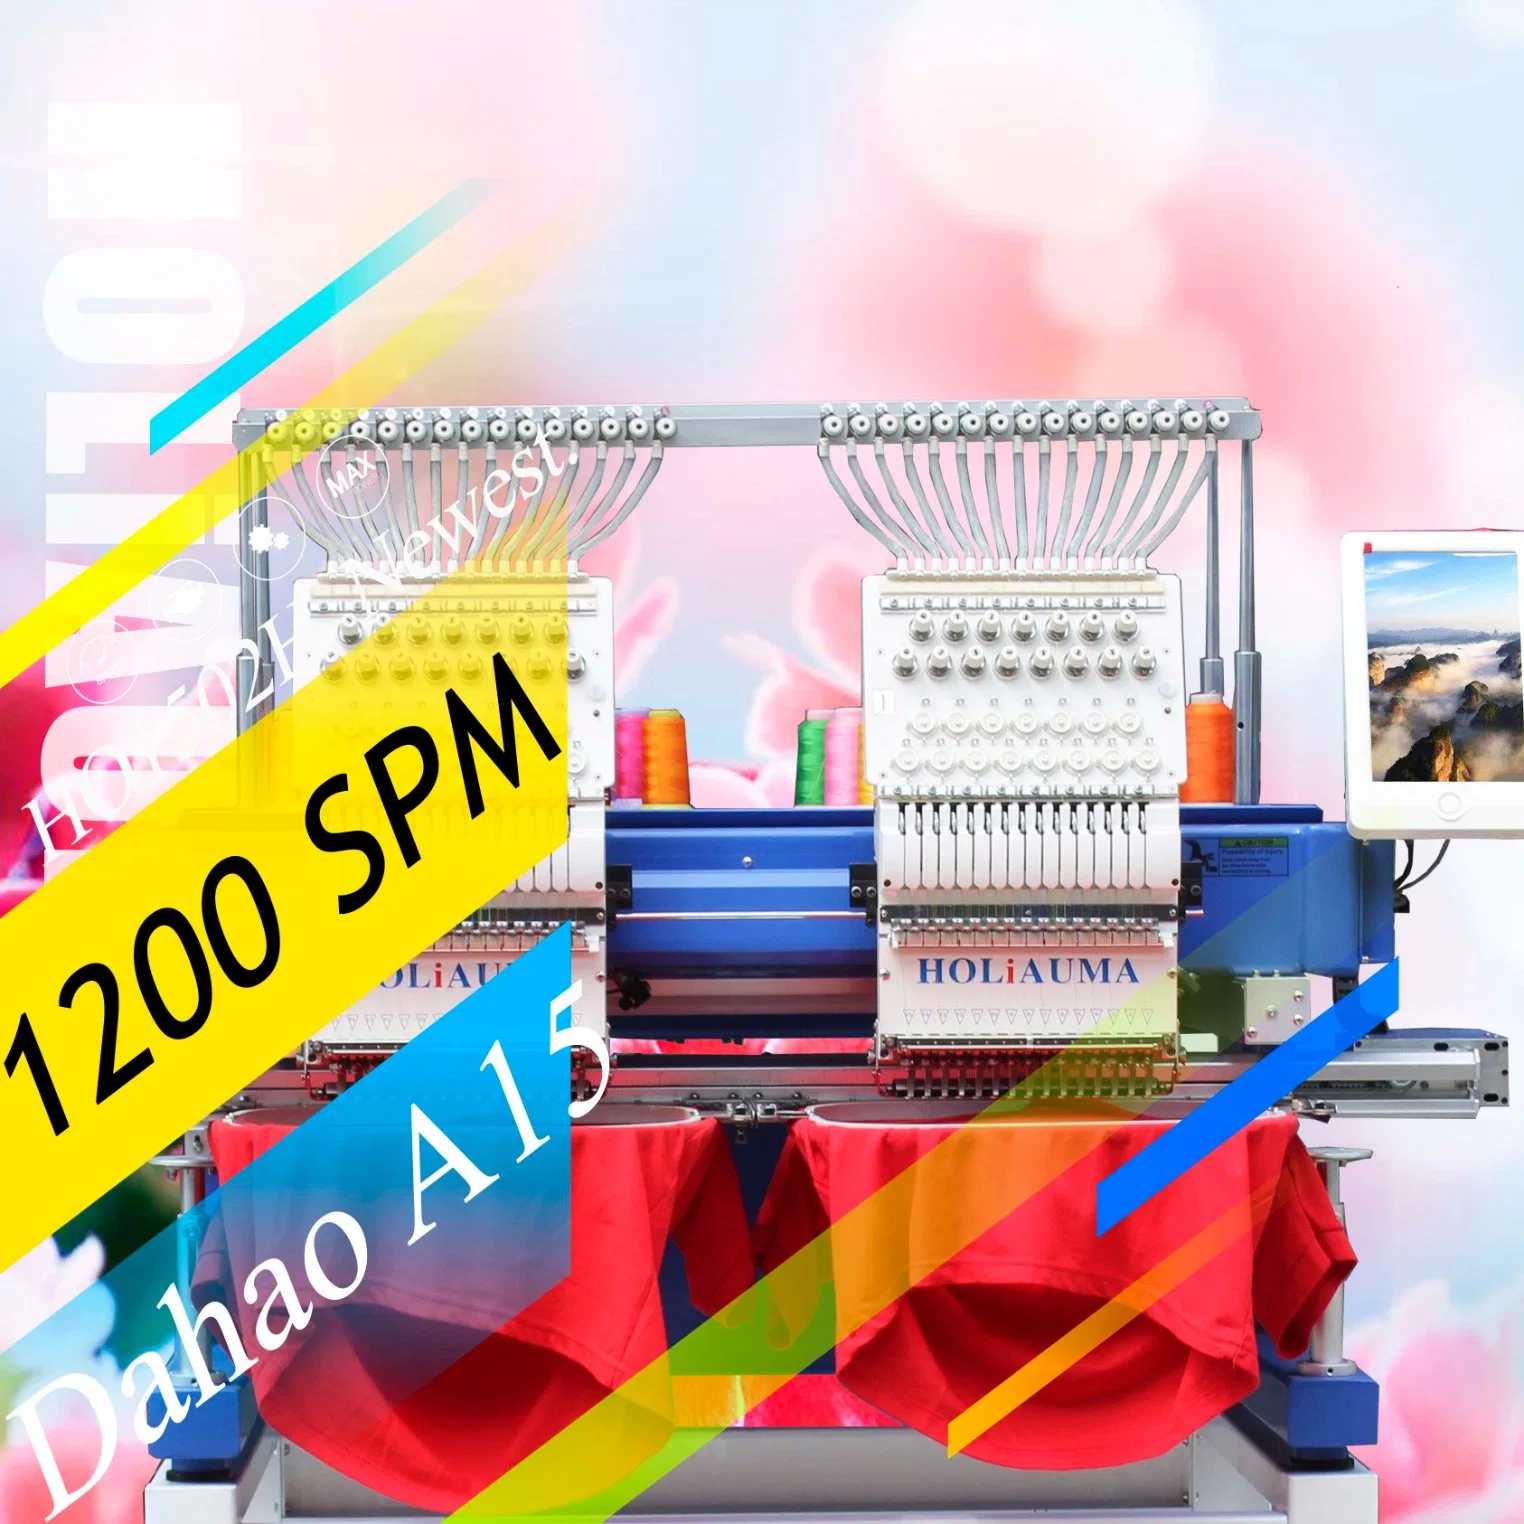 5 Years Quality Warranty! ! ! Swf Barudan 2 Head Embroidery Machine German for Sale Multi Function T-Shirt/Flat/Hat Devices